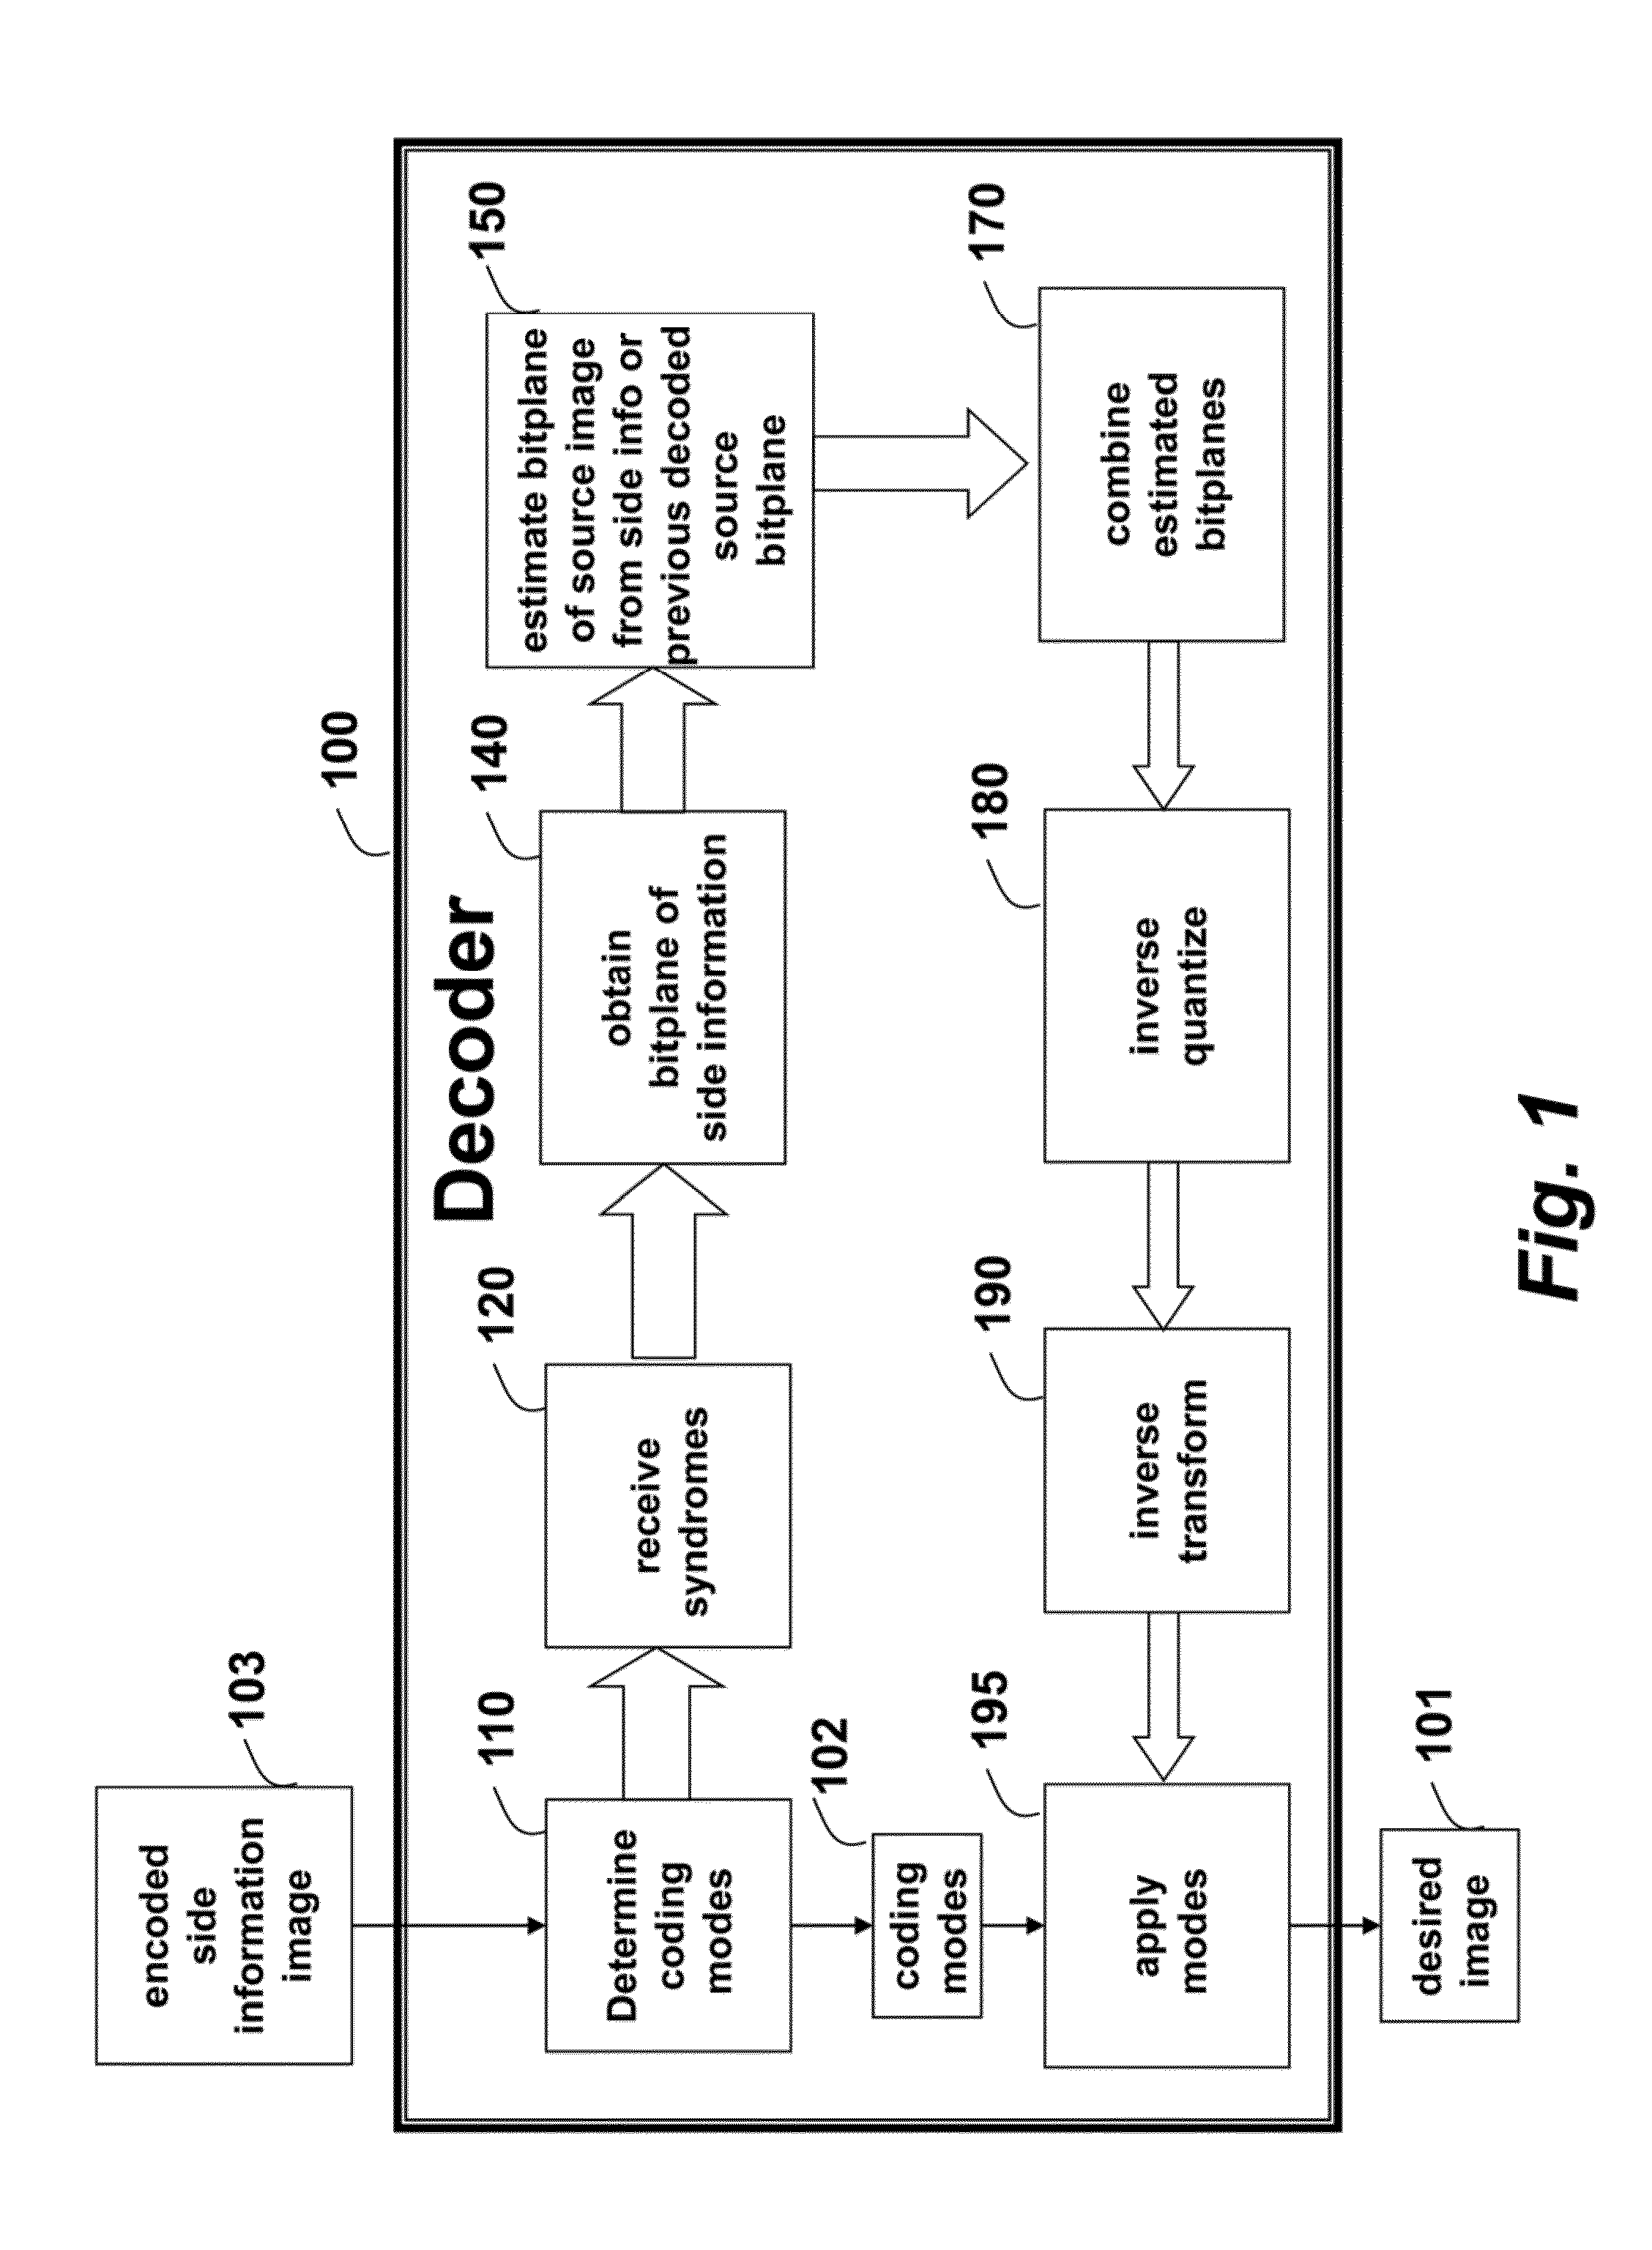 Method for improving compression efficiency of distributed source coding using intra-band information